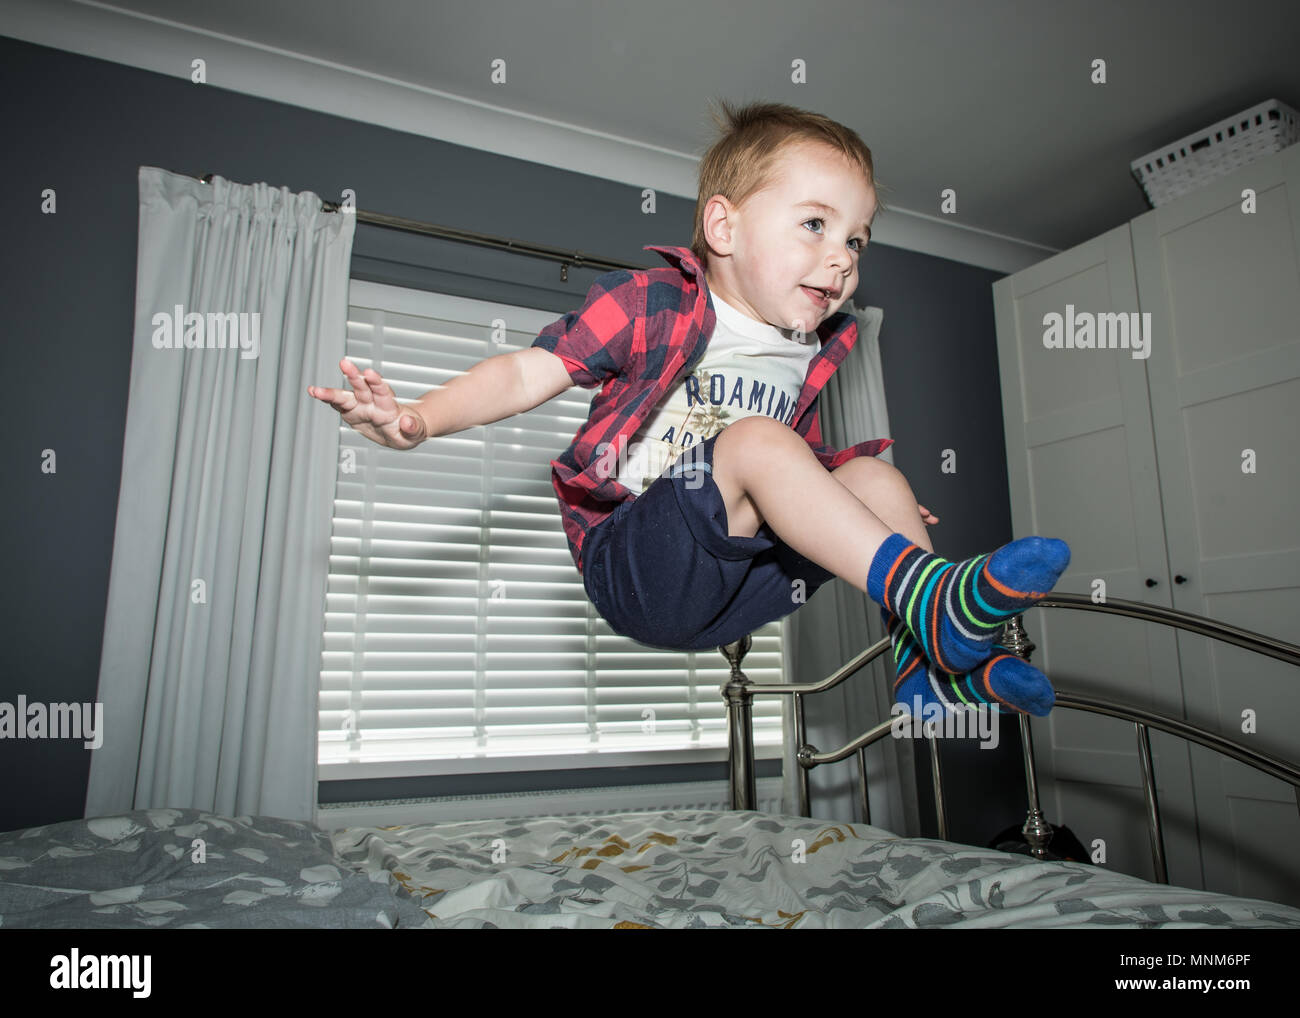 A little boy jumps on a bed in a bedroom / Child jumping on bed Stock Photo